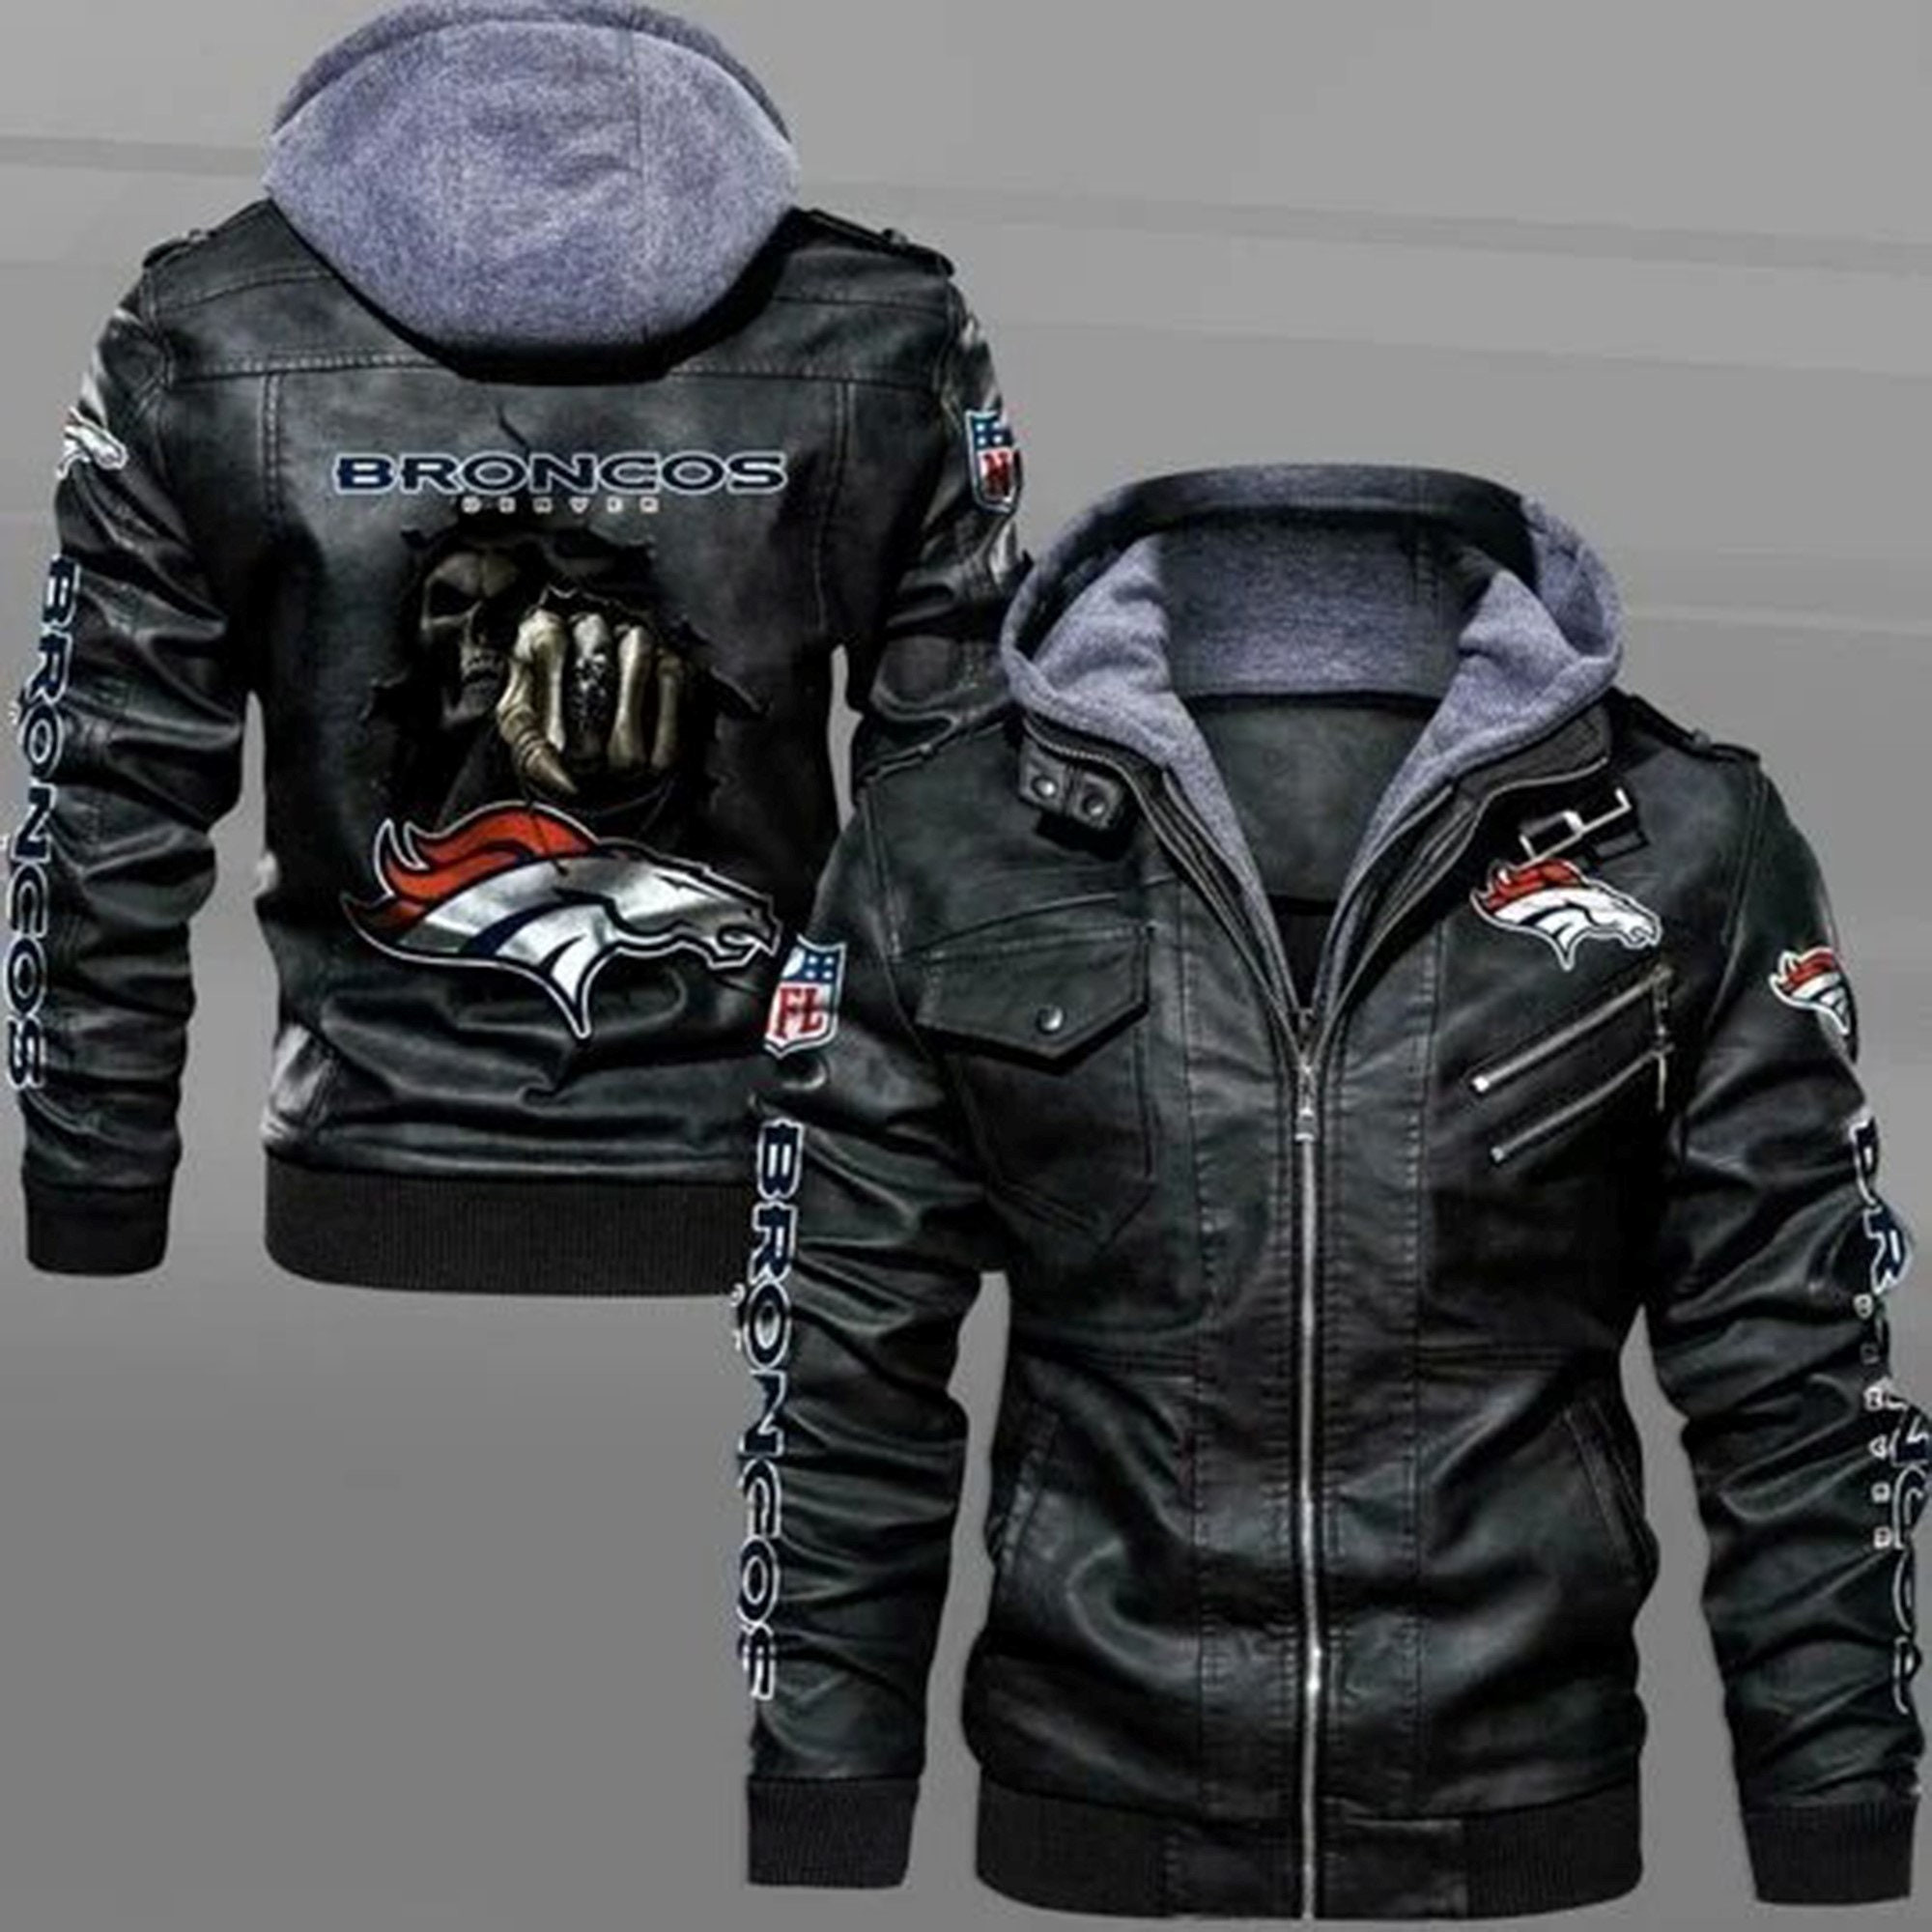 These Amazing Leather Jacket will add to the appeal of your outfit 159